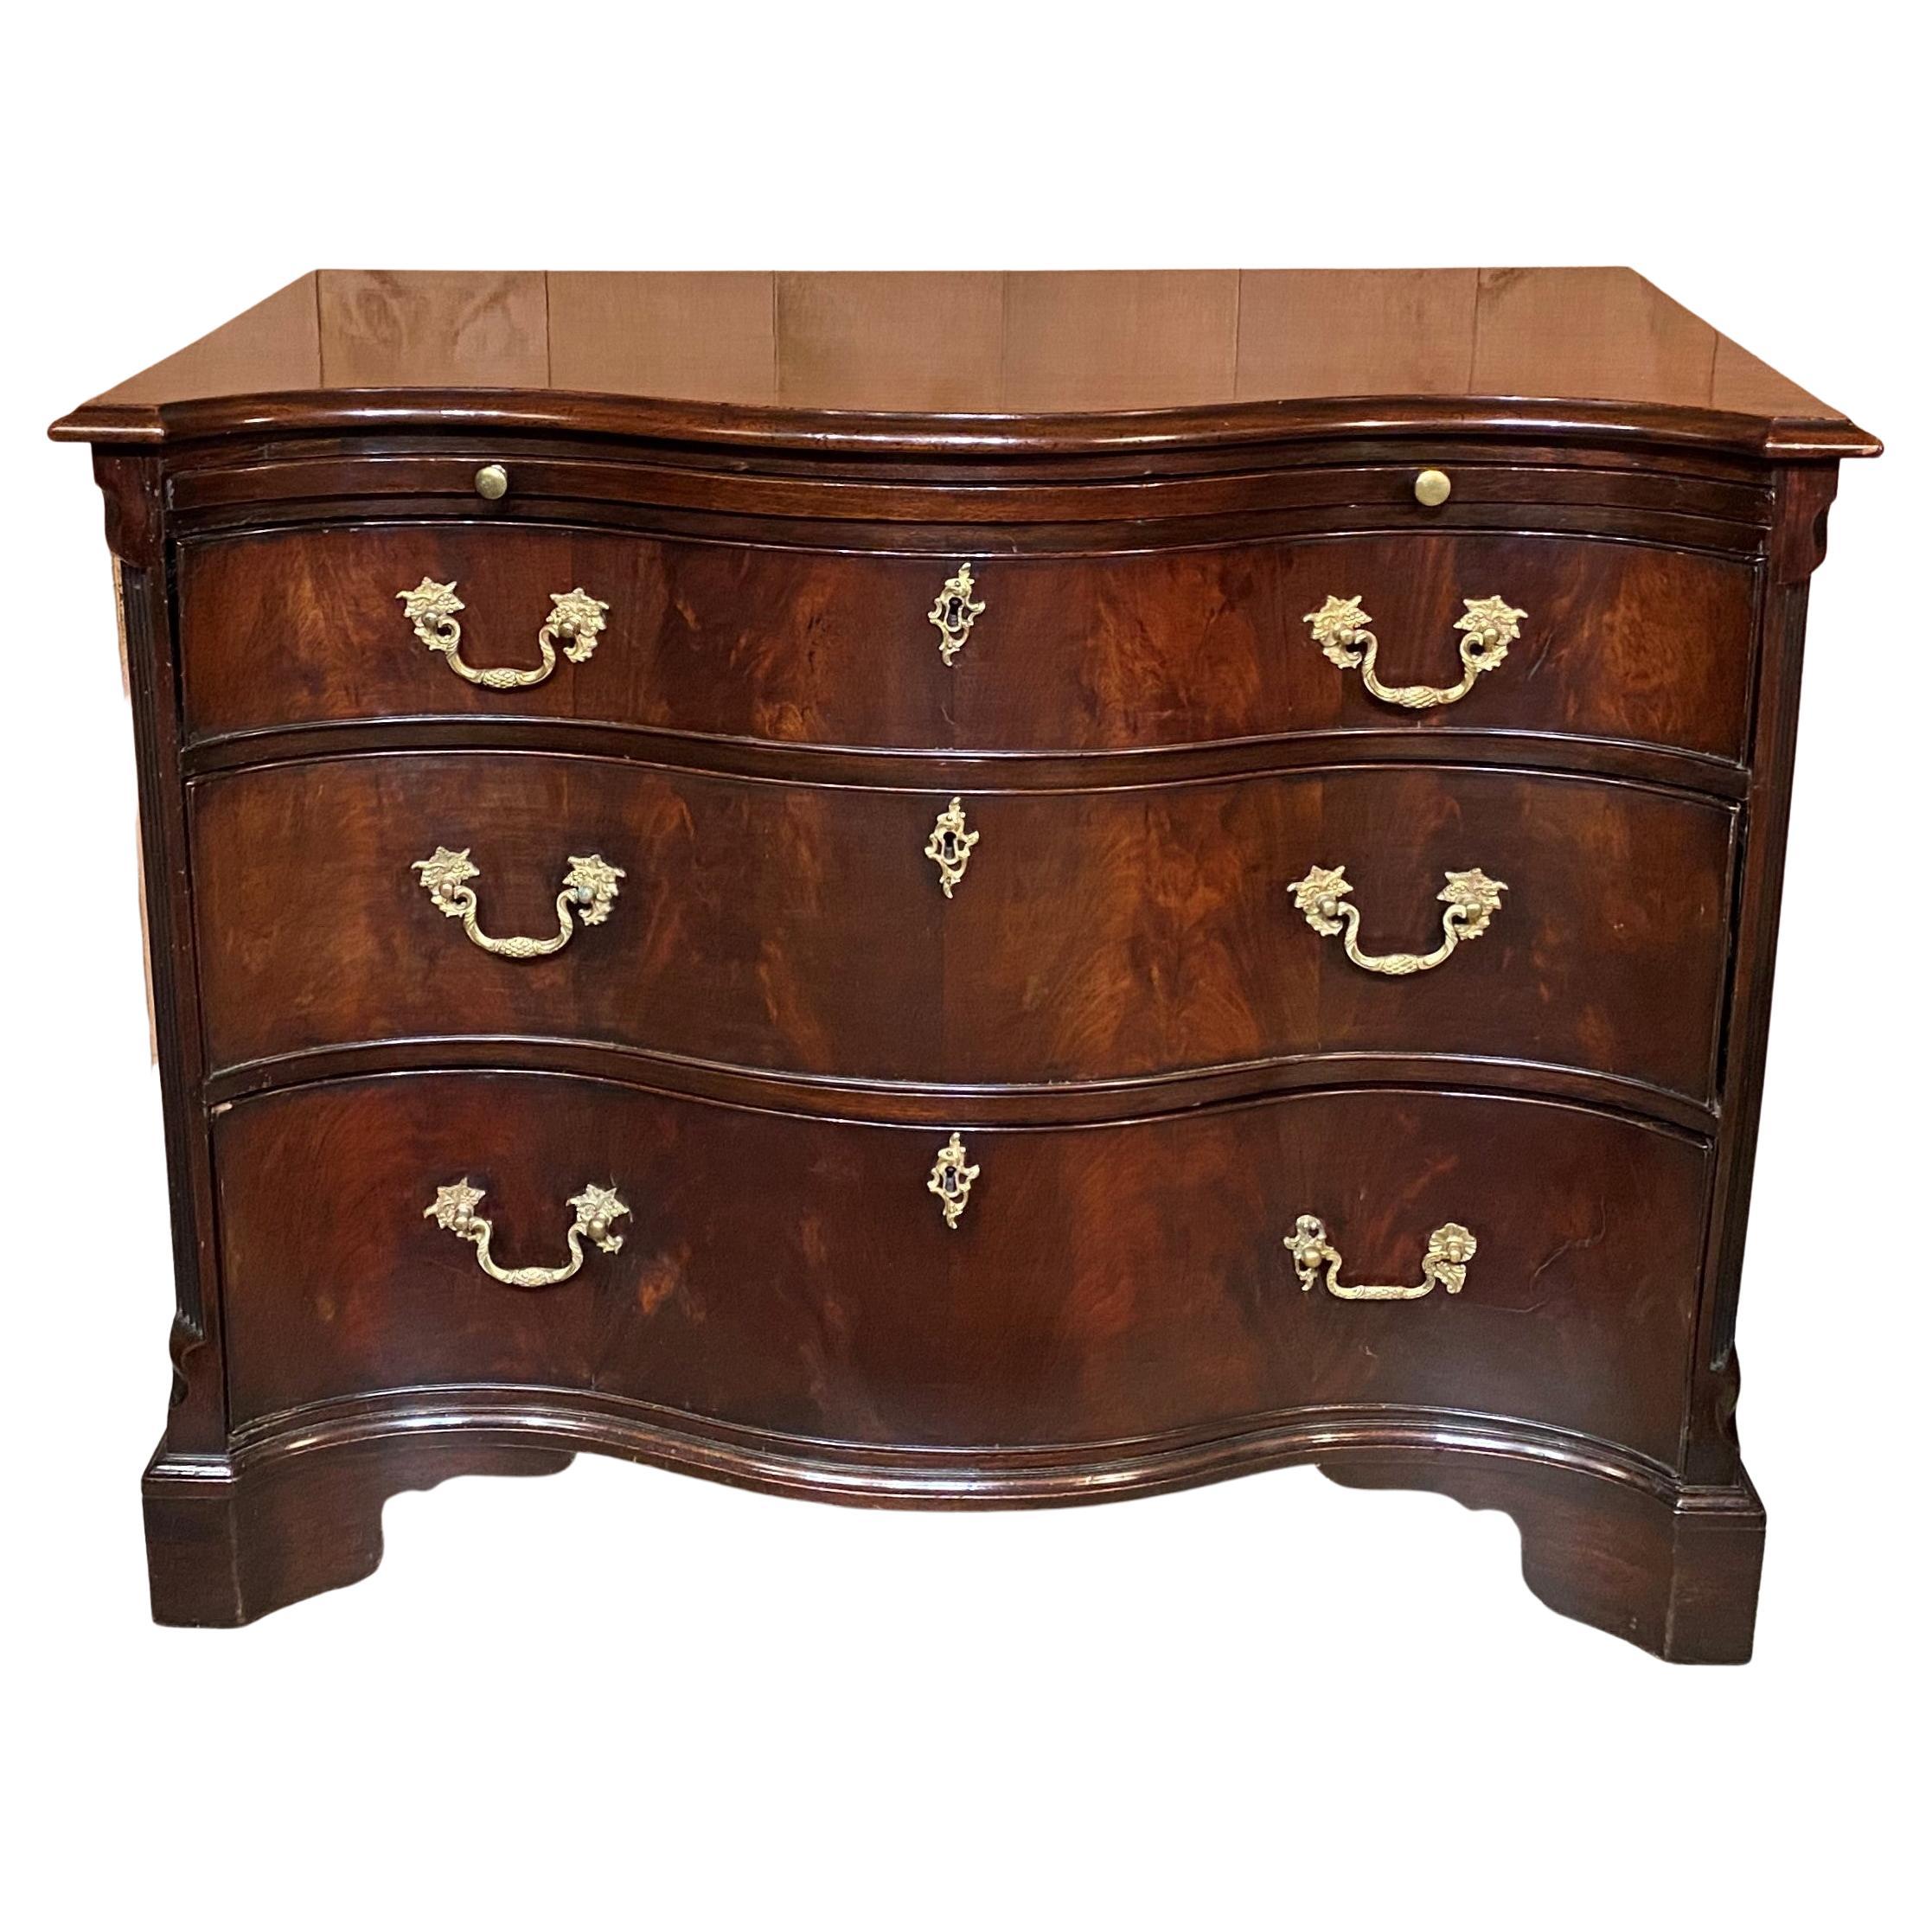 18th Century Chippendale Serpentine Mahogany Commode with Writing Slide